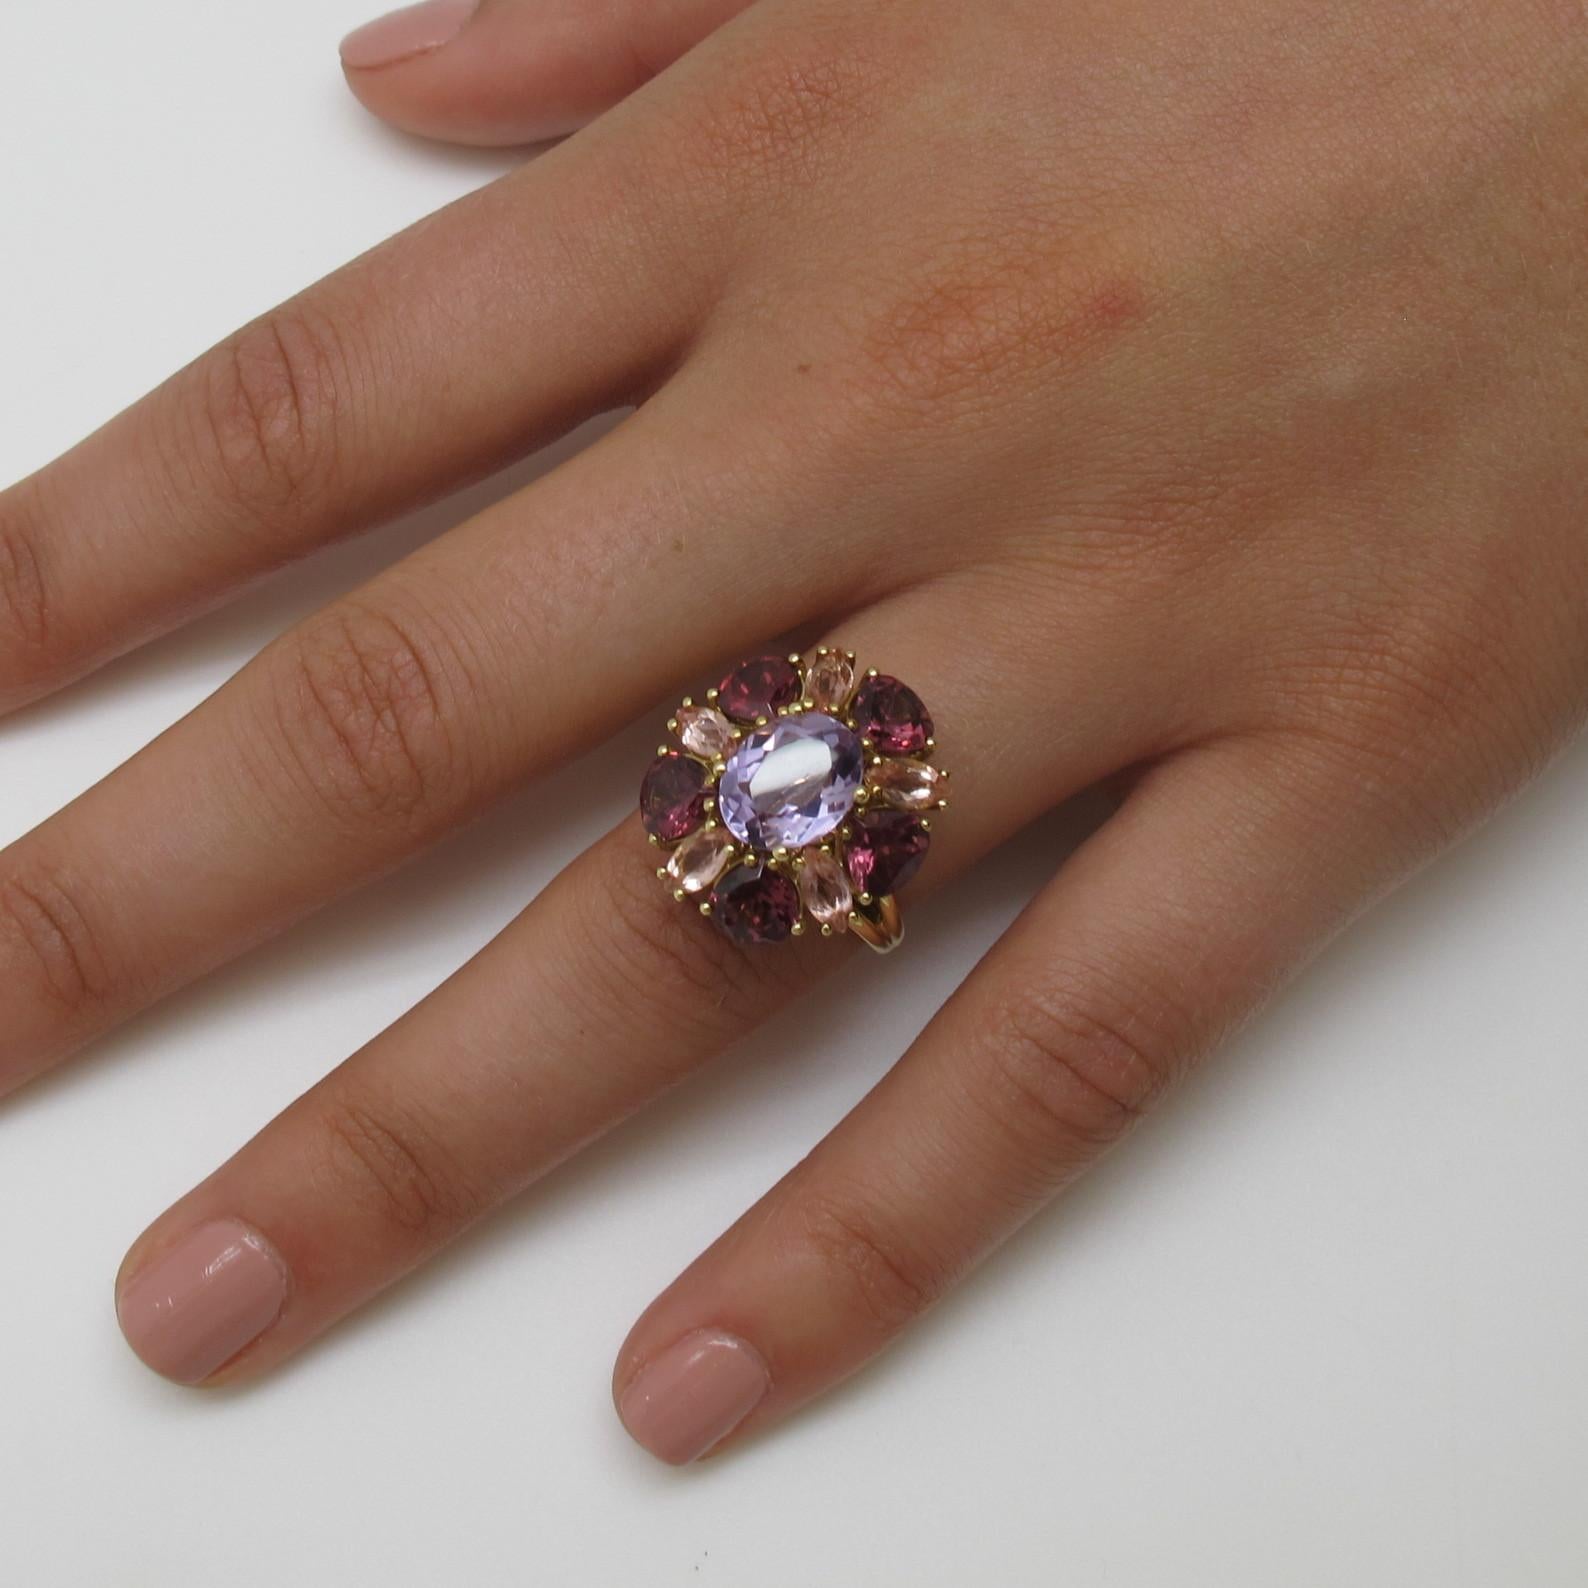 This blooming multicolor ring makes a statement that demands attention whenever worn! It’s center “Rose de France” color amethyst measures 10.02x8.20x4.96mm  and weighs 2.41 carats. It is encircled by 5 pear shaped garnets (4.25 carats total